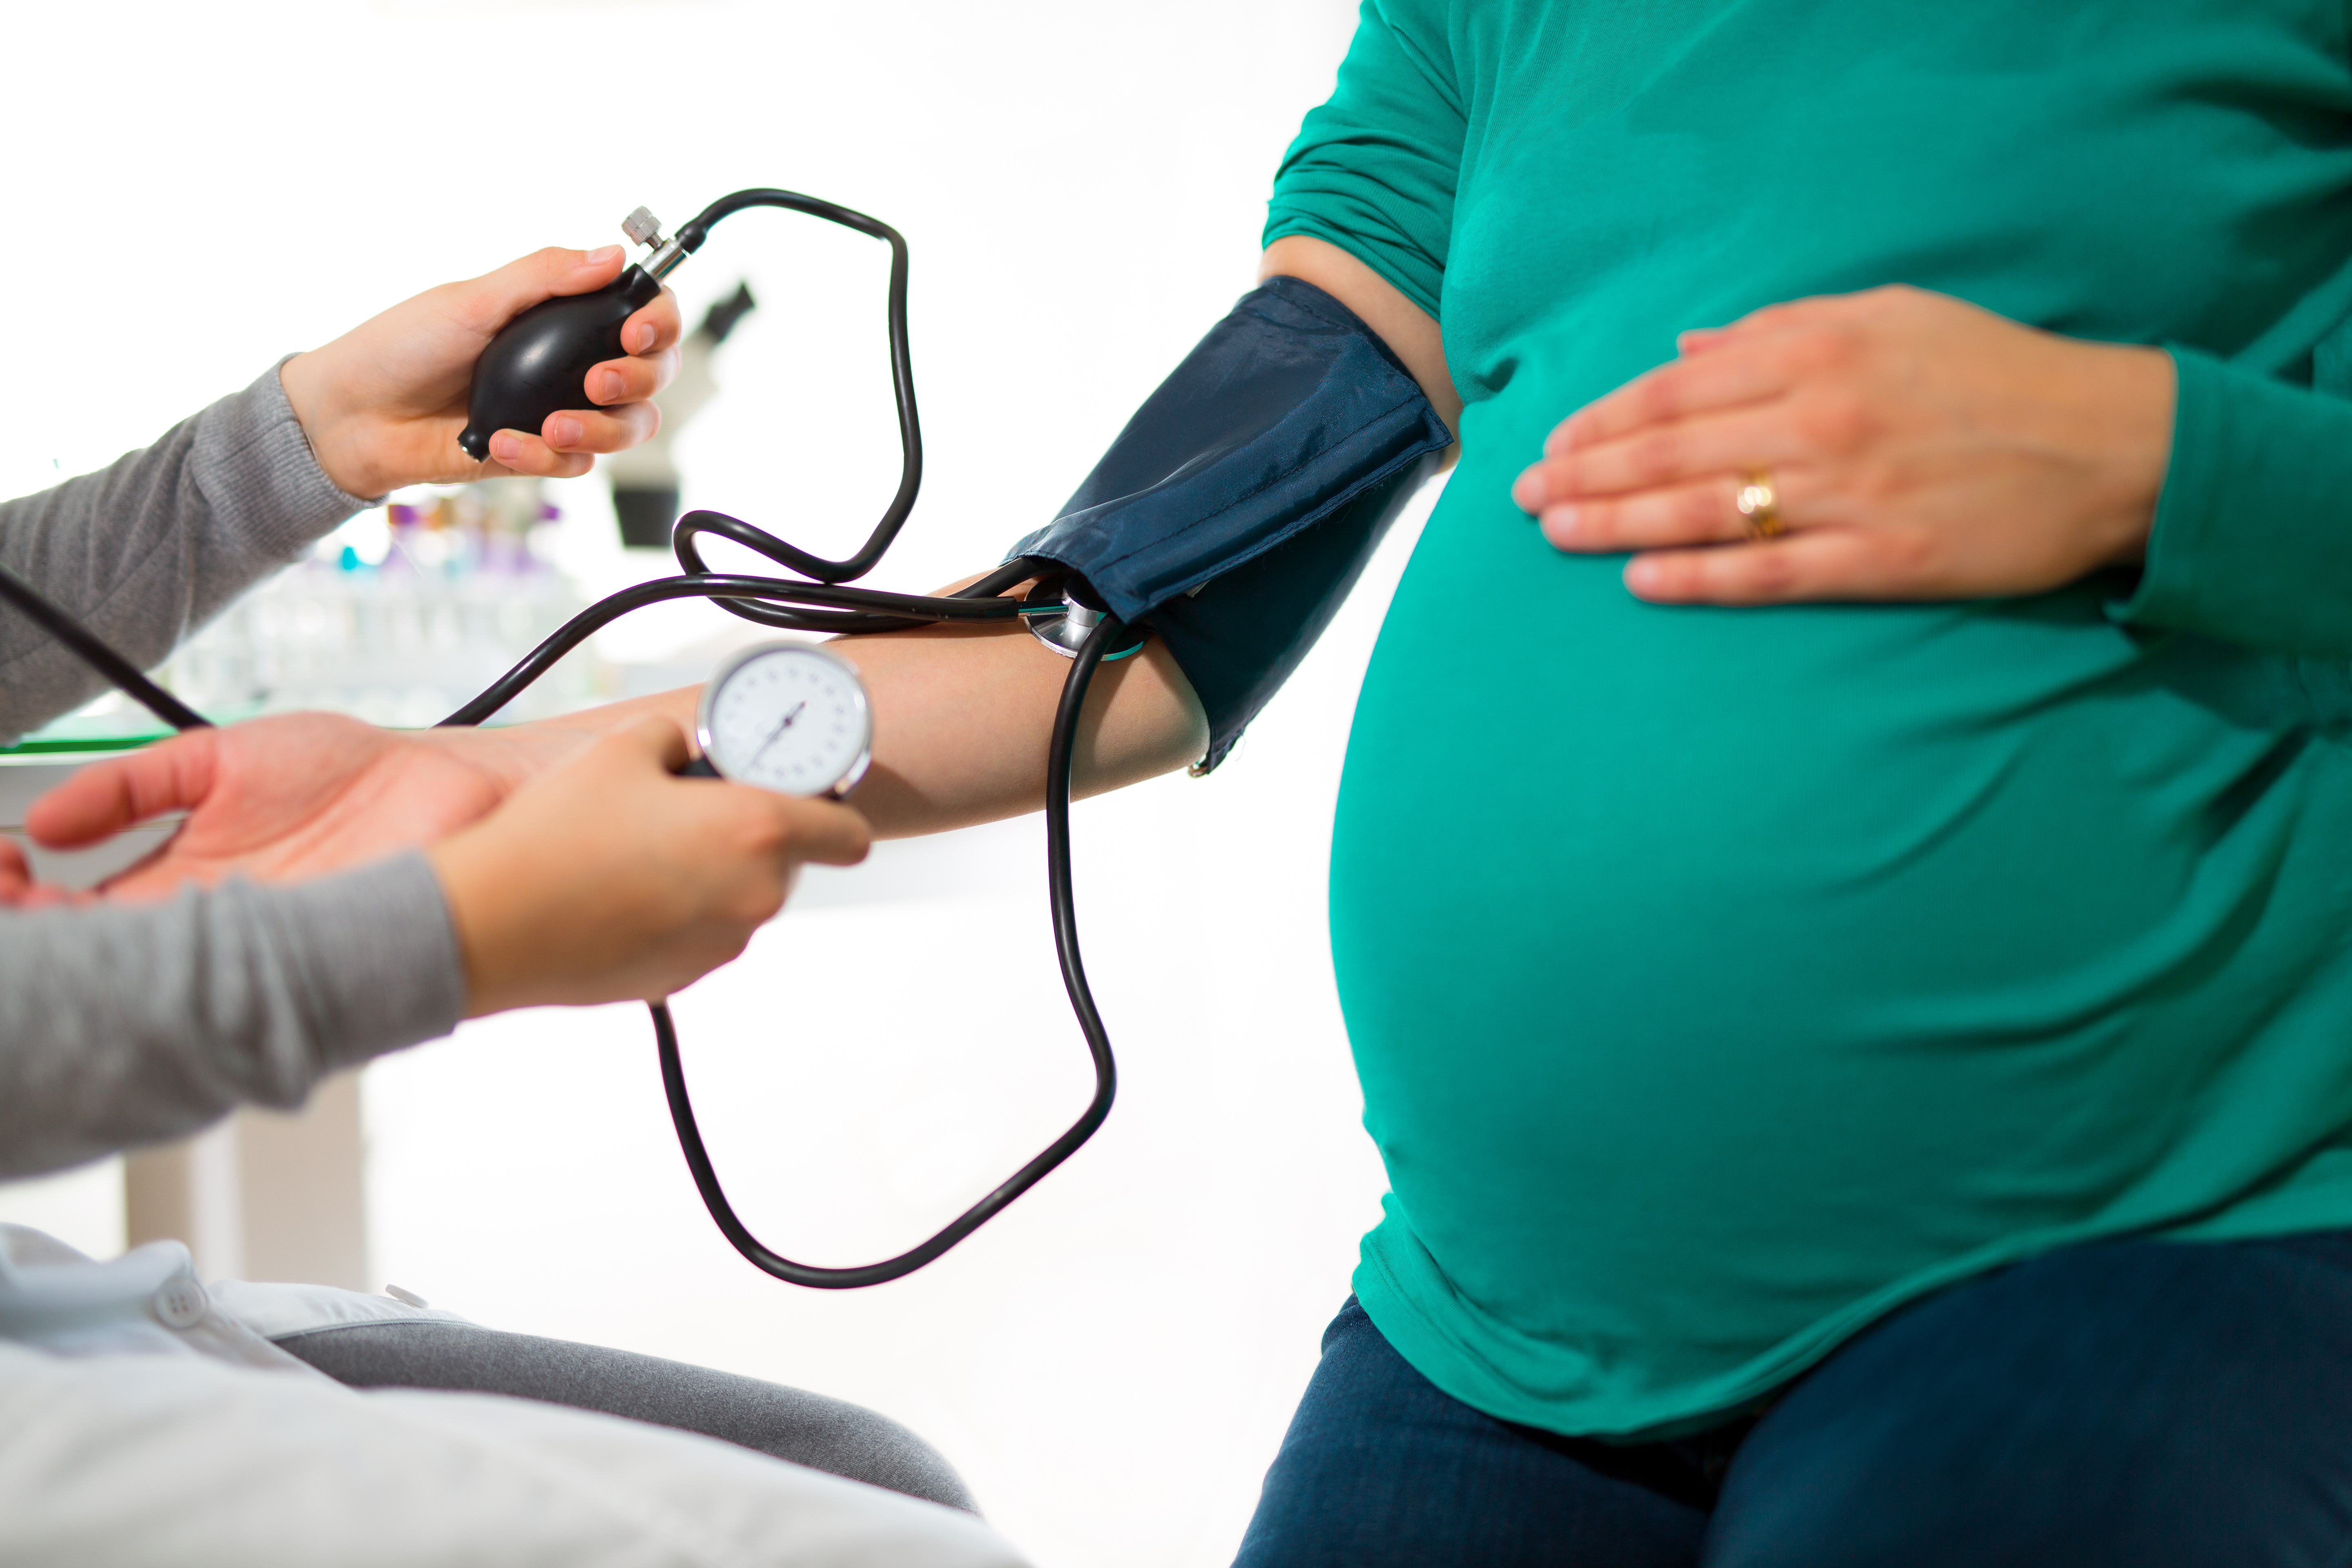 Pregnant woman at doctor’s office having pressure measured